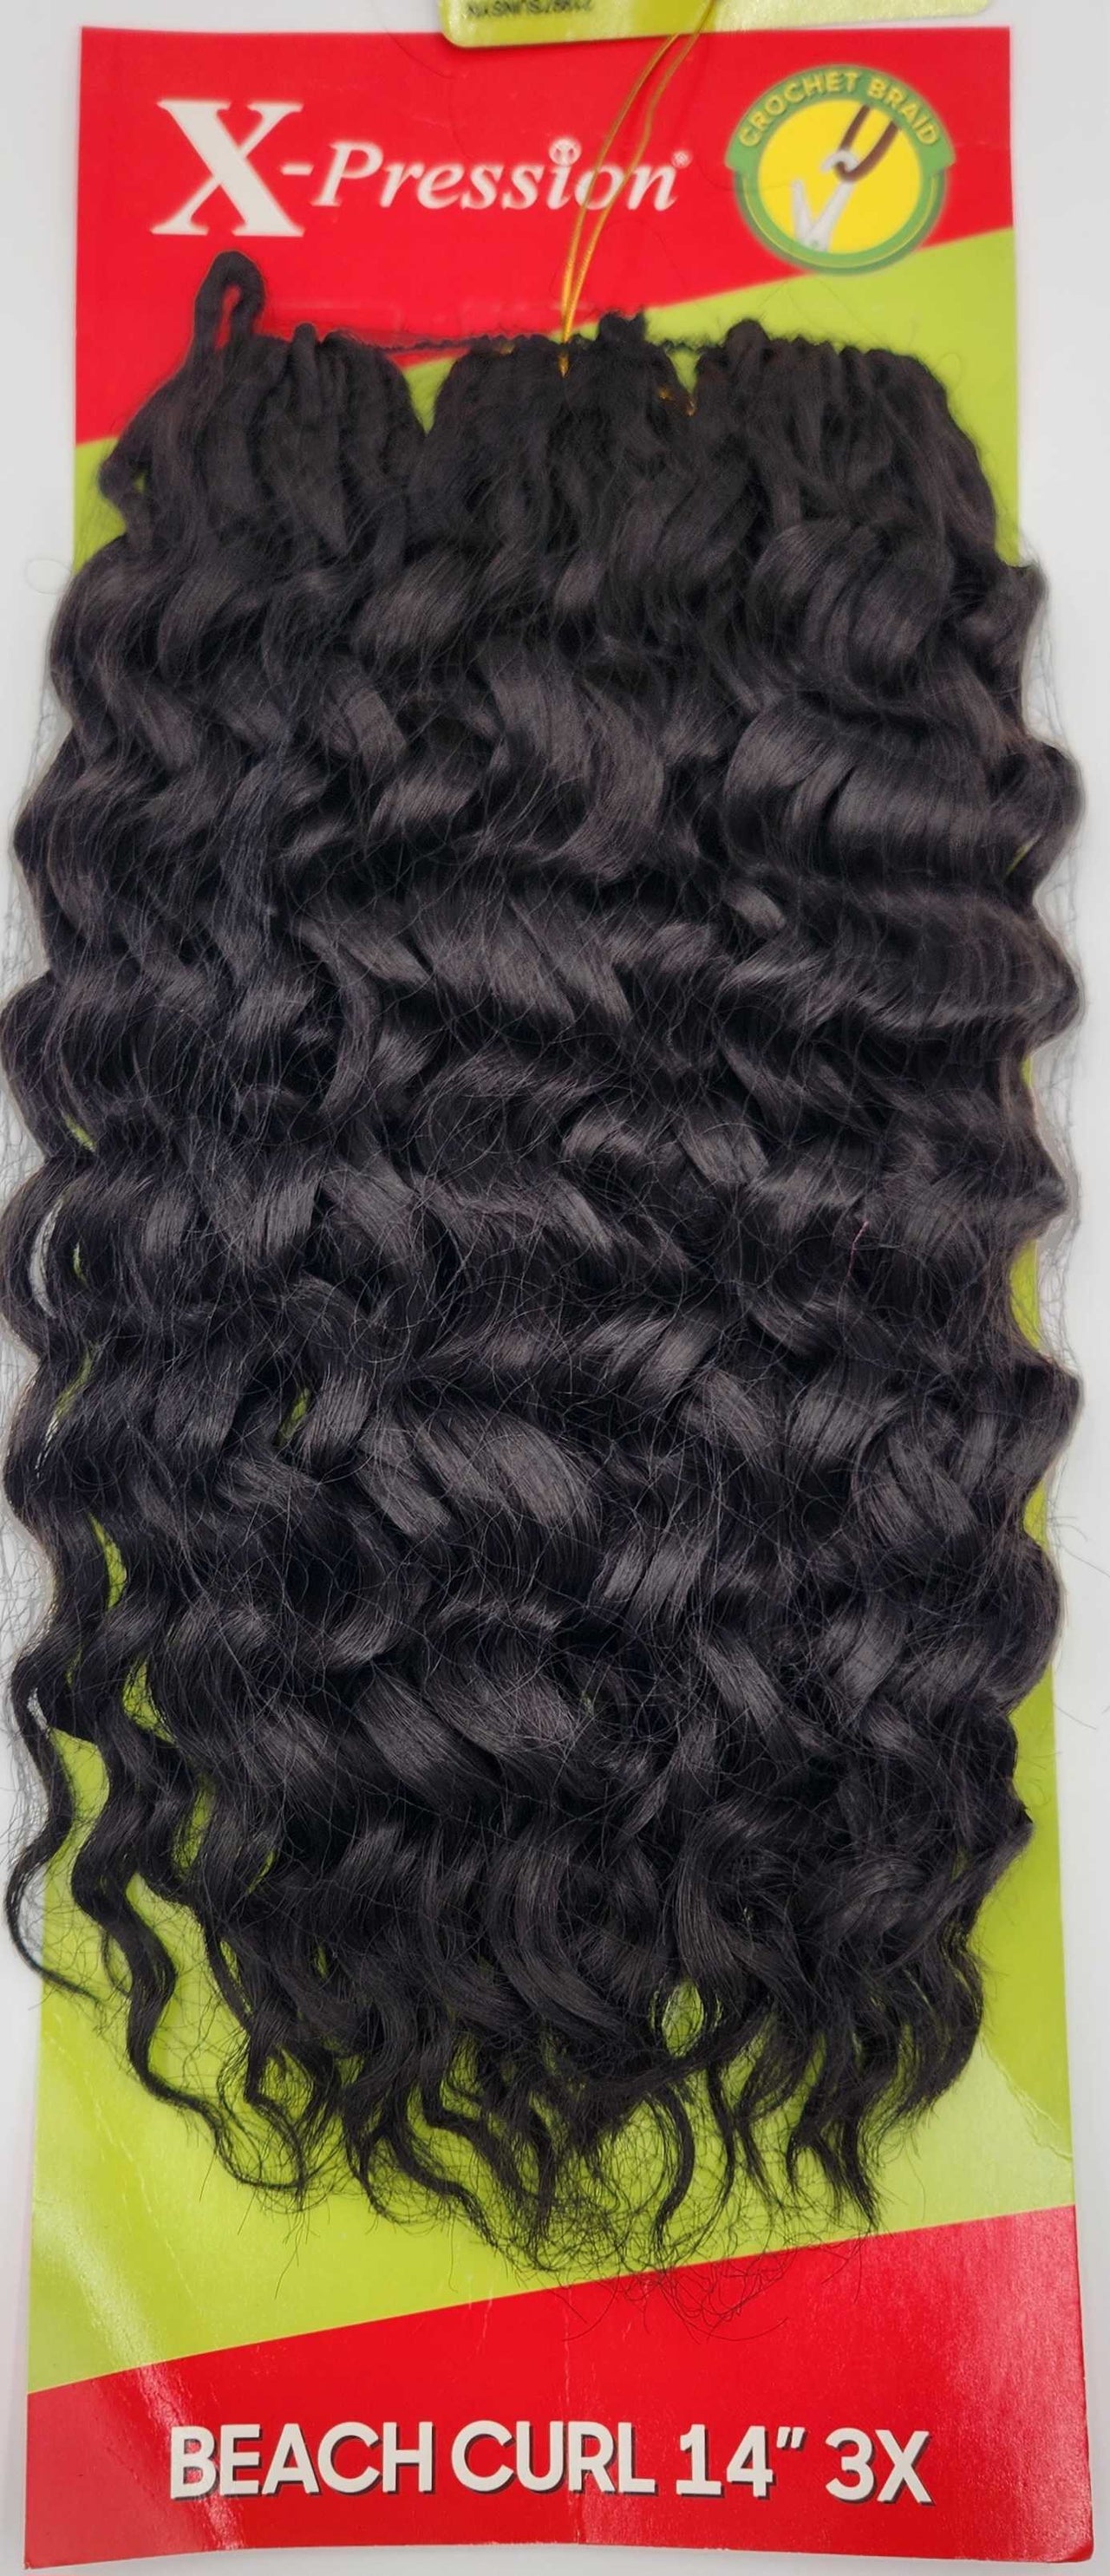 Outre X-Pression 3x Beach Curl 14" - Elevate Styles